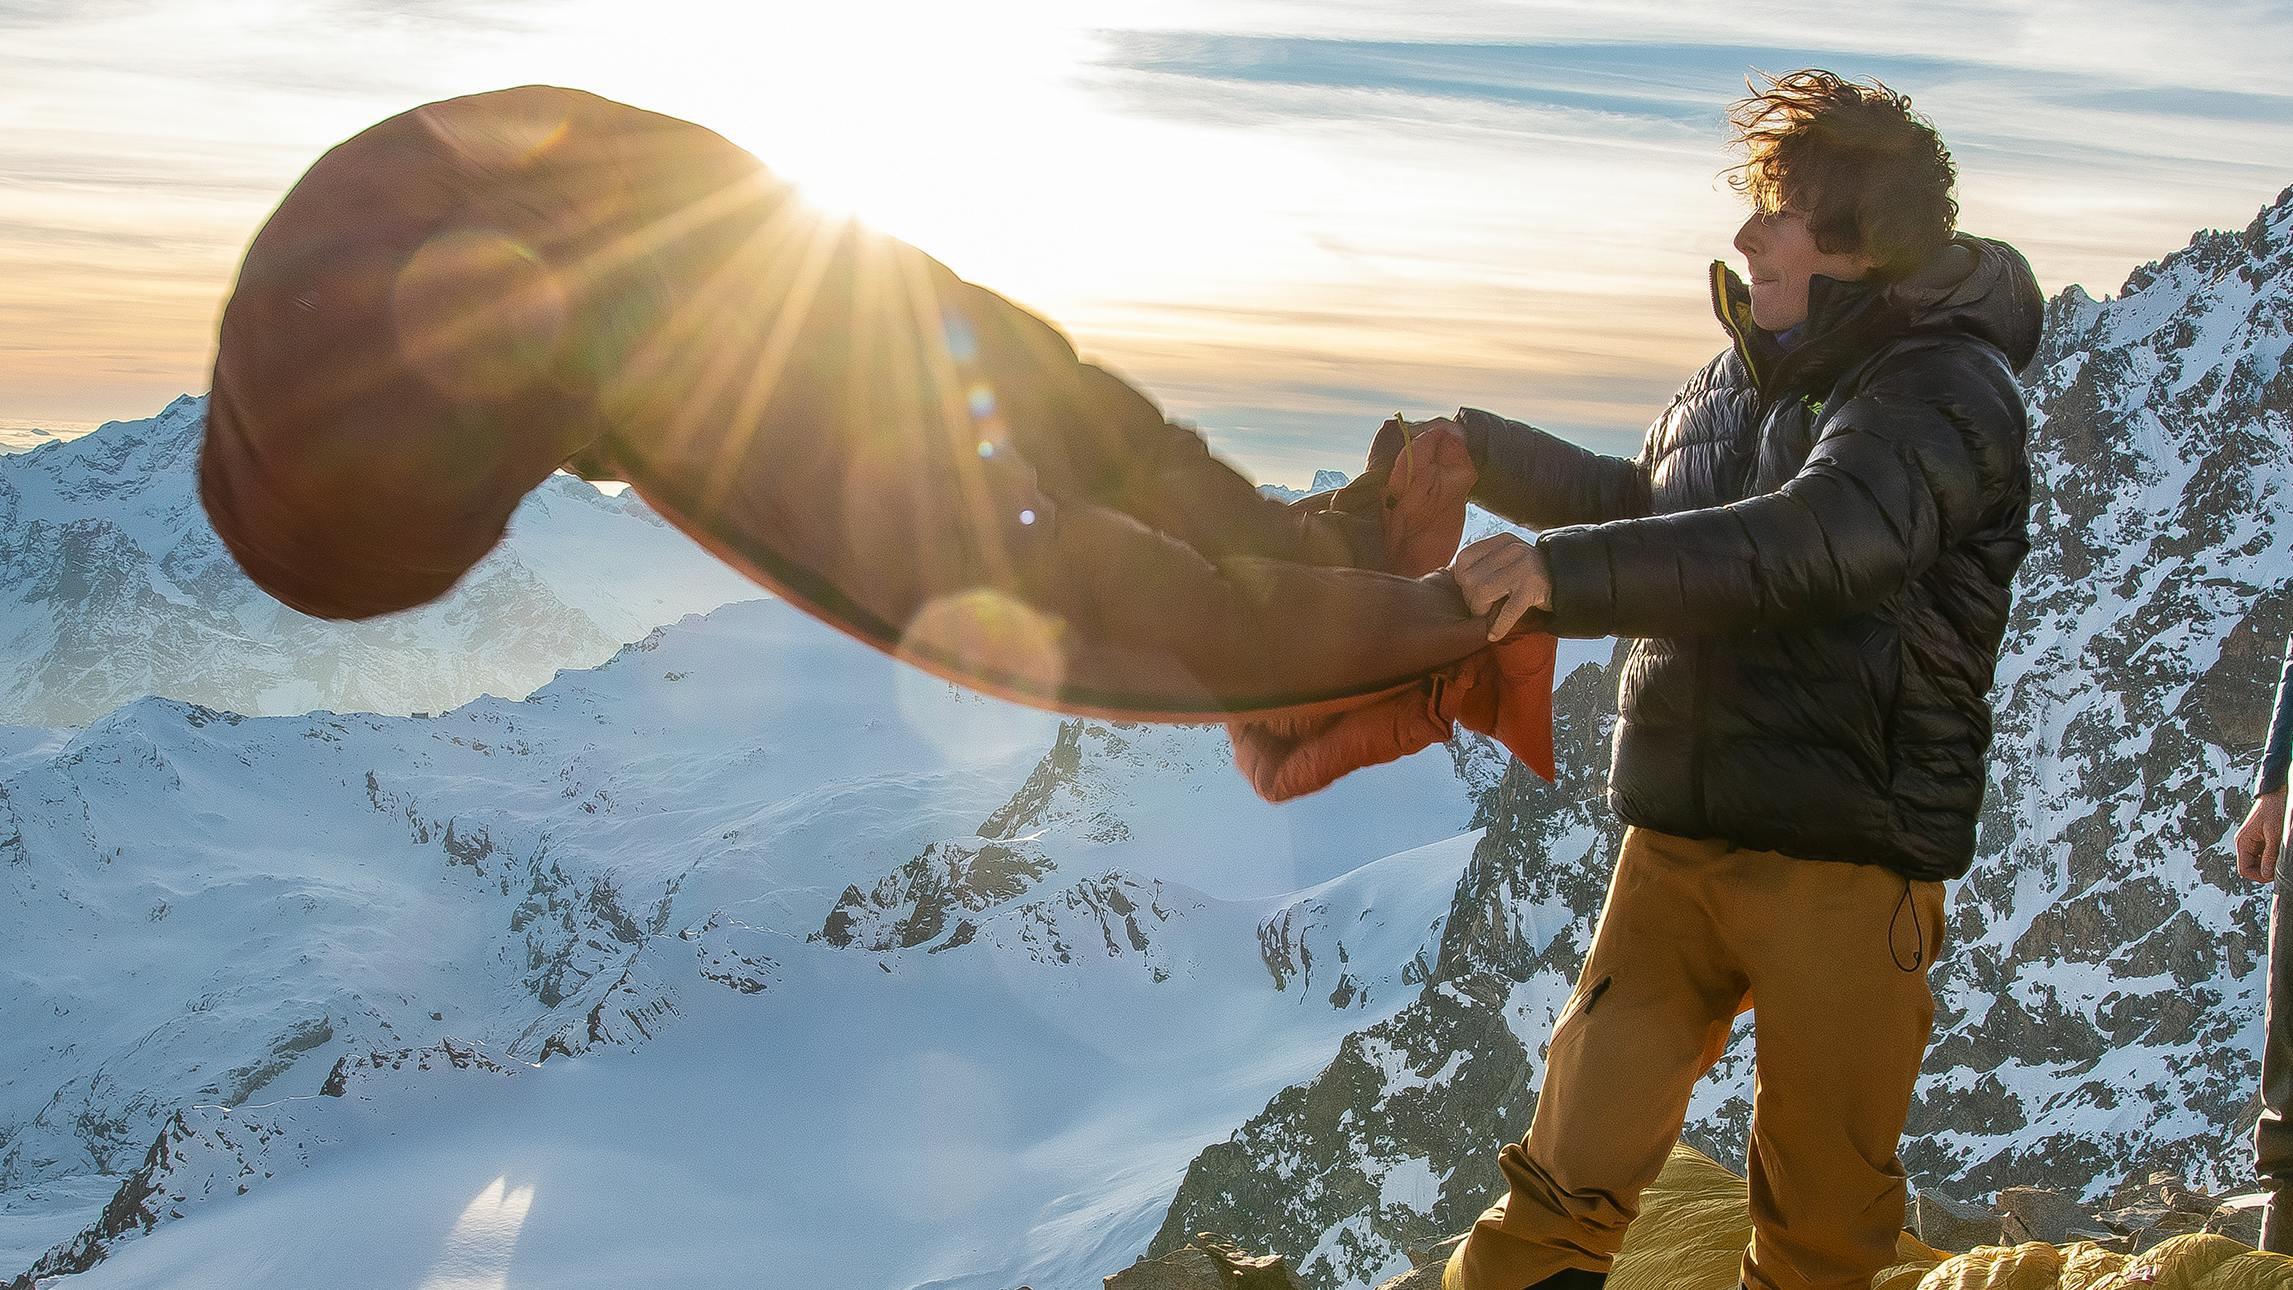 A hiker fluffy out his sleeping bag on a mountain summit next to his hiking partner with the sun setting over snowy mountain scenery in the background.